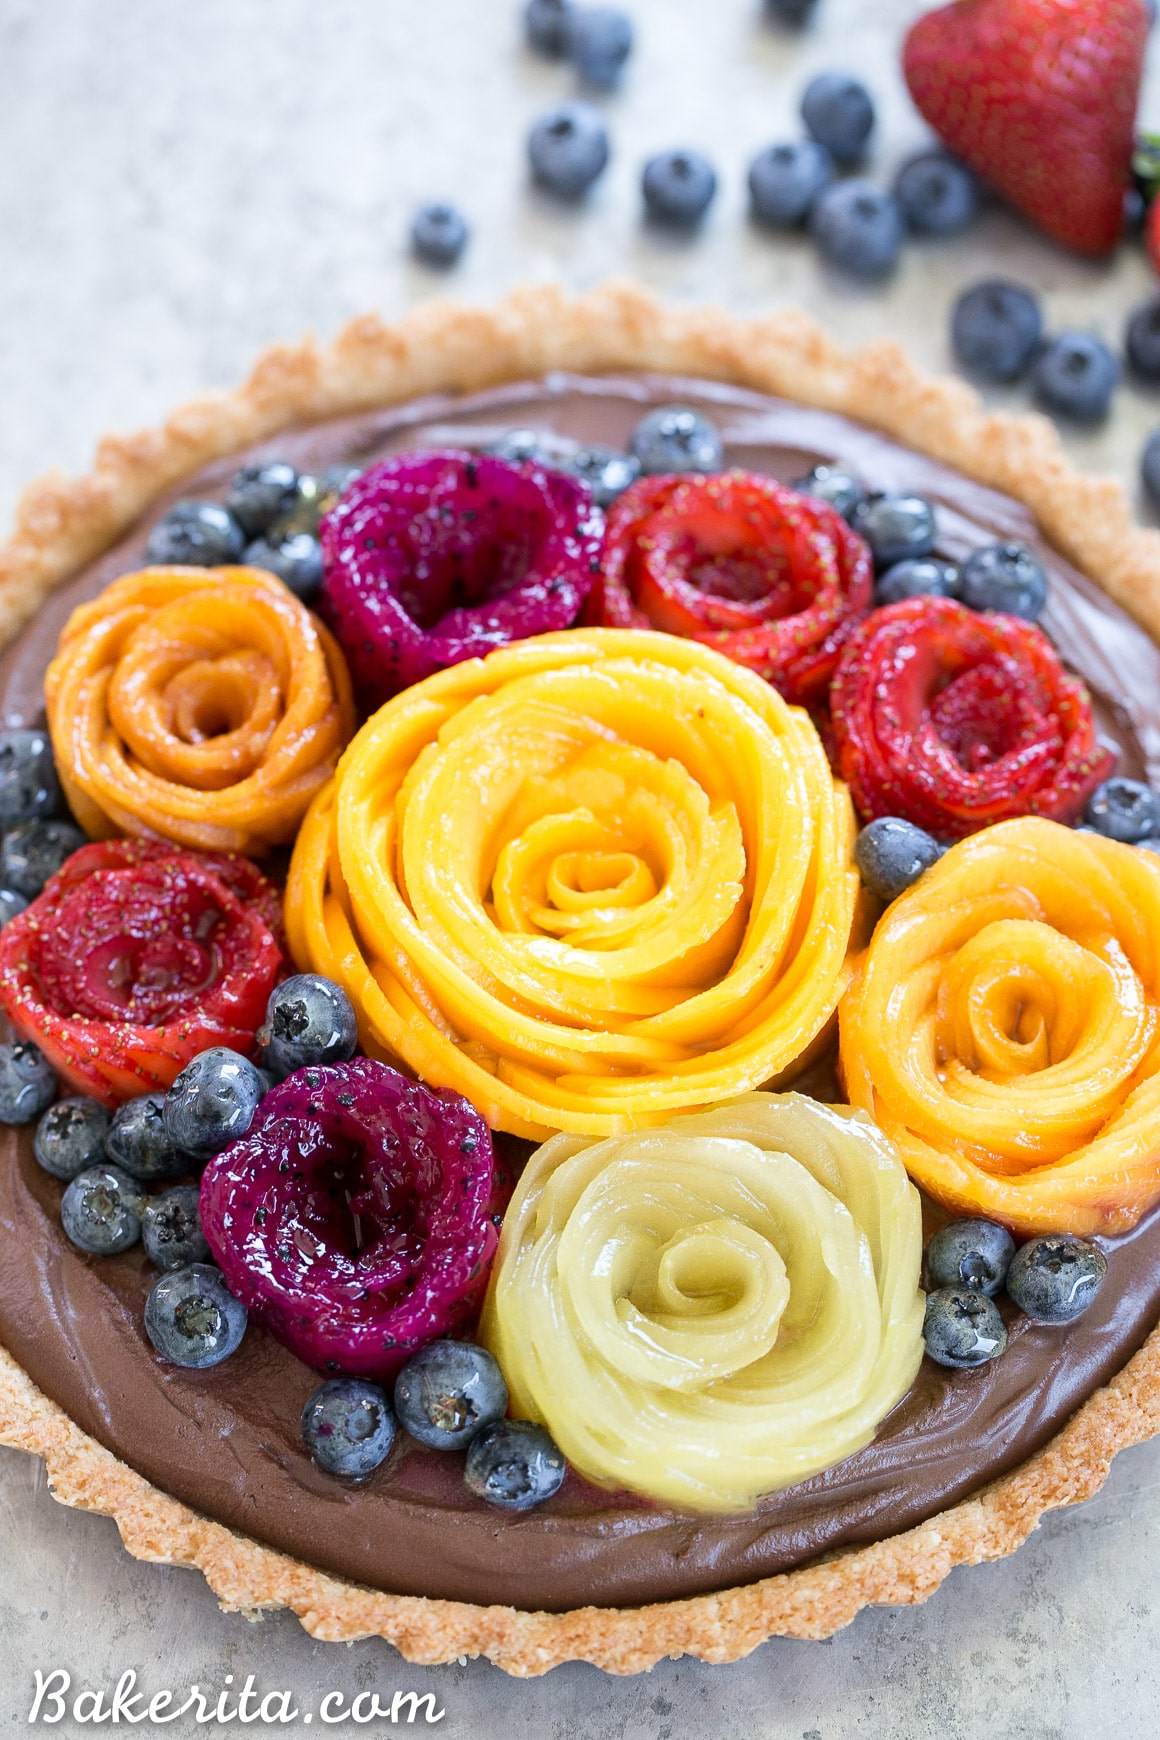 This Chocolate Mousse Tart with Coconut Crust + Fresh Fruit Flowers has the most incredible vegan chocolate mousse filling! You'd never guess that this rich dessert is gluten-free, Paleo, and vegan.